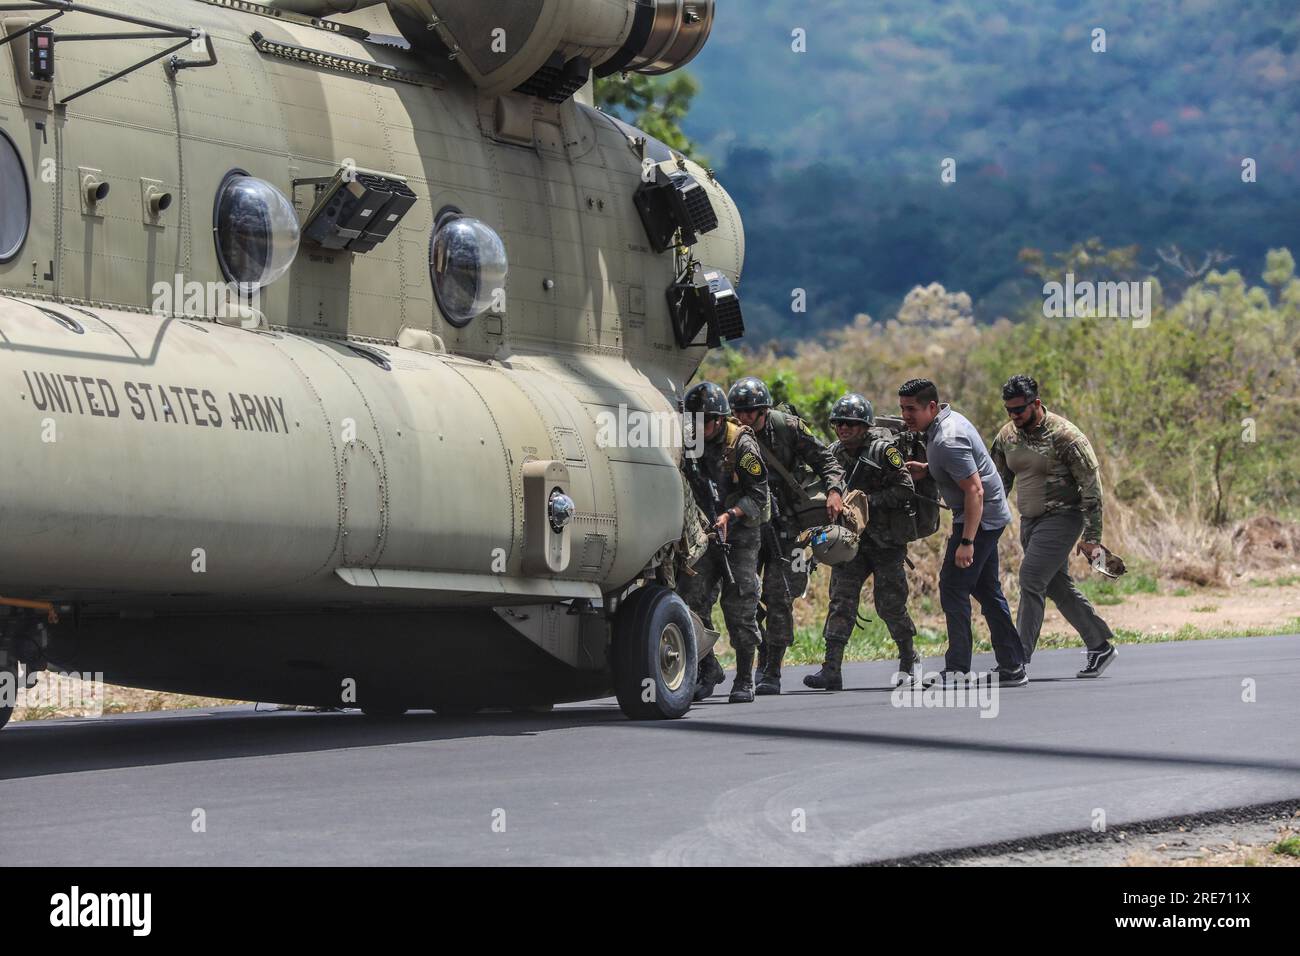 Soldiers with the Guatemalan army, 7th Special Forces Group (Airborne) and the Arkansas Army National Guard board a CH-47 Chinook from 1-228th Aviation Regiment for exfiltration, during CENTAM Guardian 23 in El Cerinal, Guatemala on March 23, 2023.  CG23 is an annual Army-led combined, joint, interagency, multi-national partnership-building exercise designed to build capacity, capabilities and interoperability with Central American partner nations. (U.S. Army photo by Sgt. 1st Class Iman Broady-Chin) Stock Photo